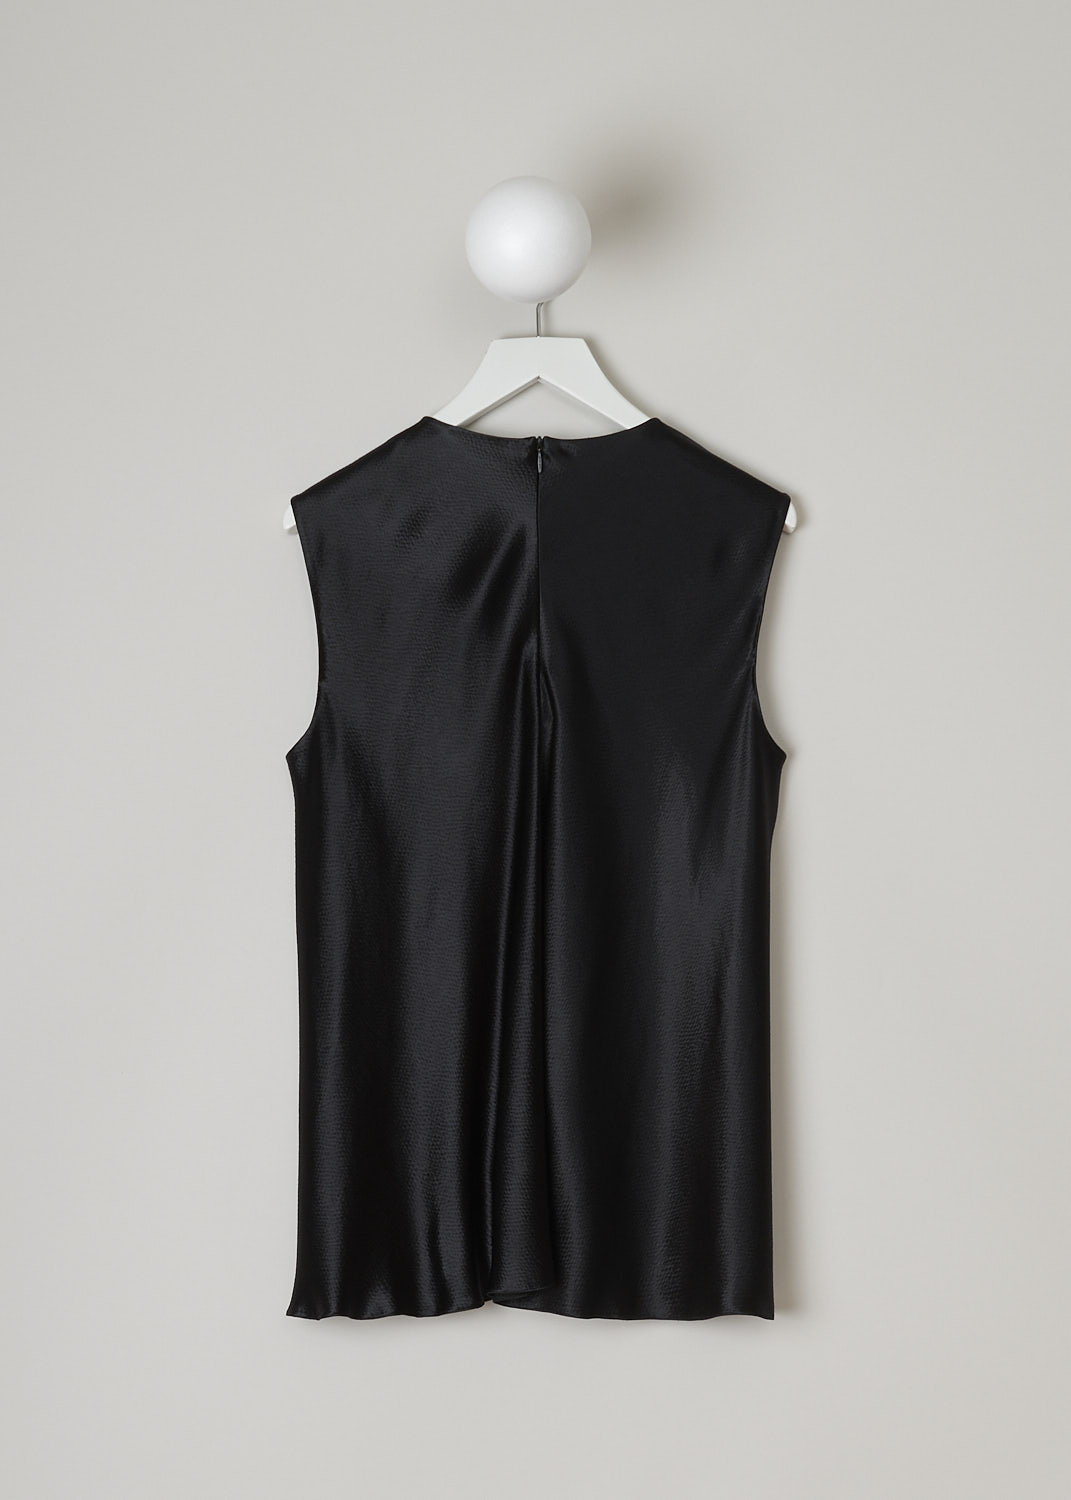 THE ROW, HAMMERED SATIN TOP IN BLACK, SHIRA_TOP_4923WI_616_BLACK,  Black, Back, This hammered satin sleeveless top in black has a round neckline with a pleated front detailing. In the back, a concealed centre zip can be found. The top has a wider silhouette.
